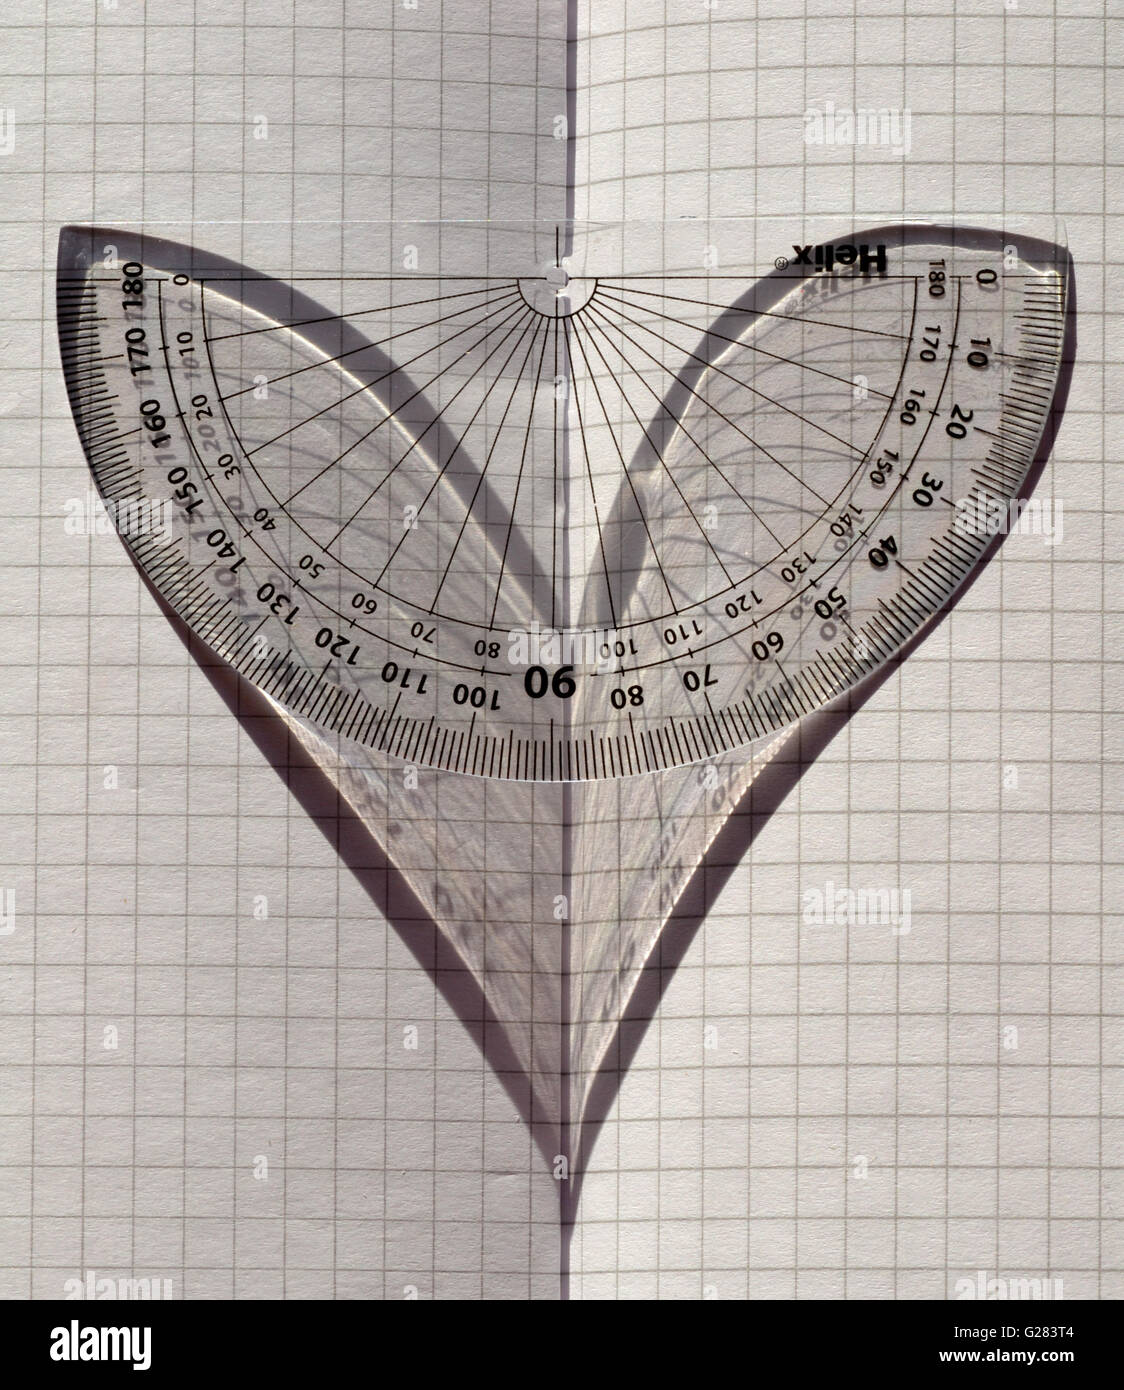 Love Maths! A protractor in sunlight on folded graph paper, the shadow depicting a heart. Stock Photo